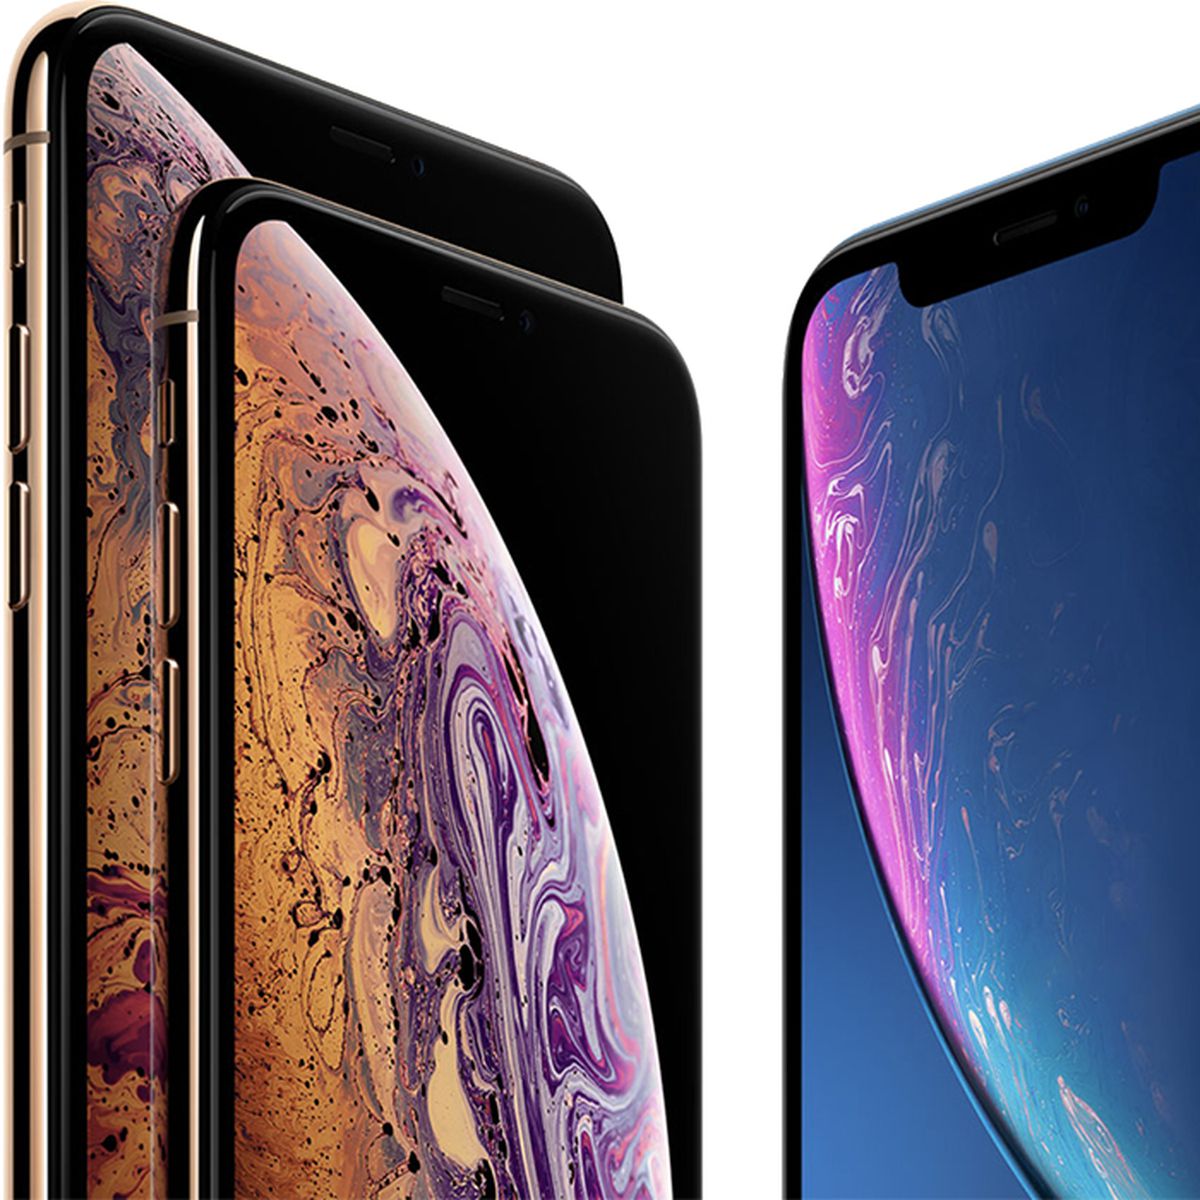 Apple Clarifies Formatting Of Iphone Xs Iphone Xs Max And Iphone Xr Names Macrumors